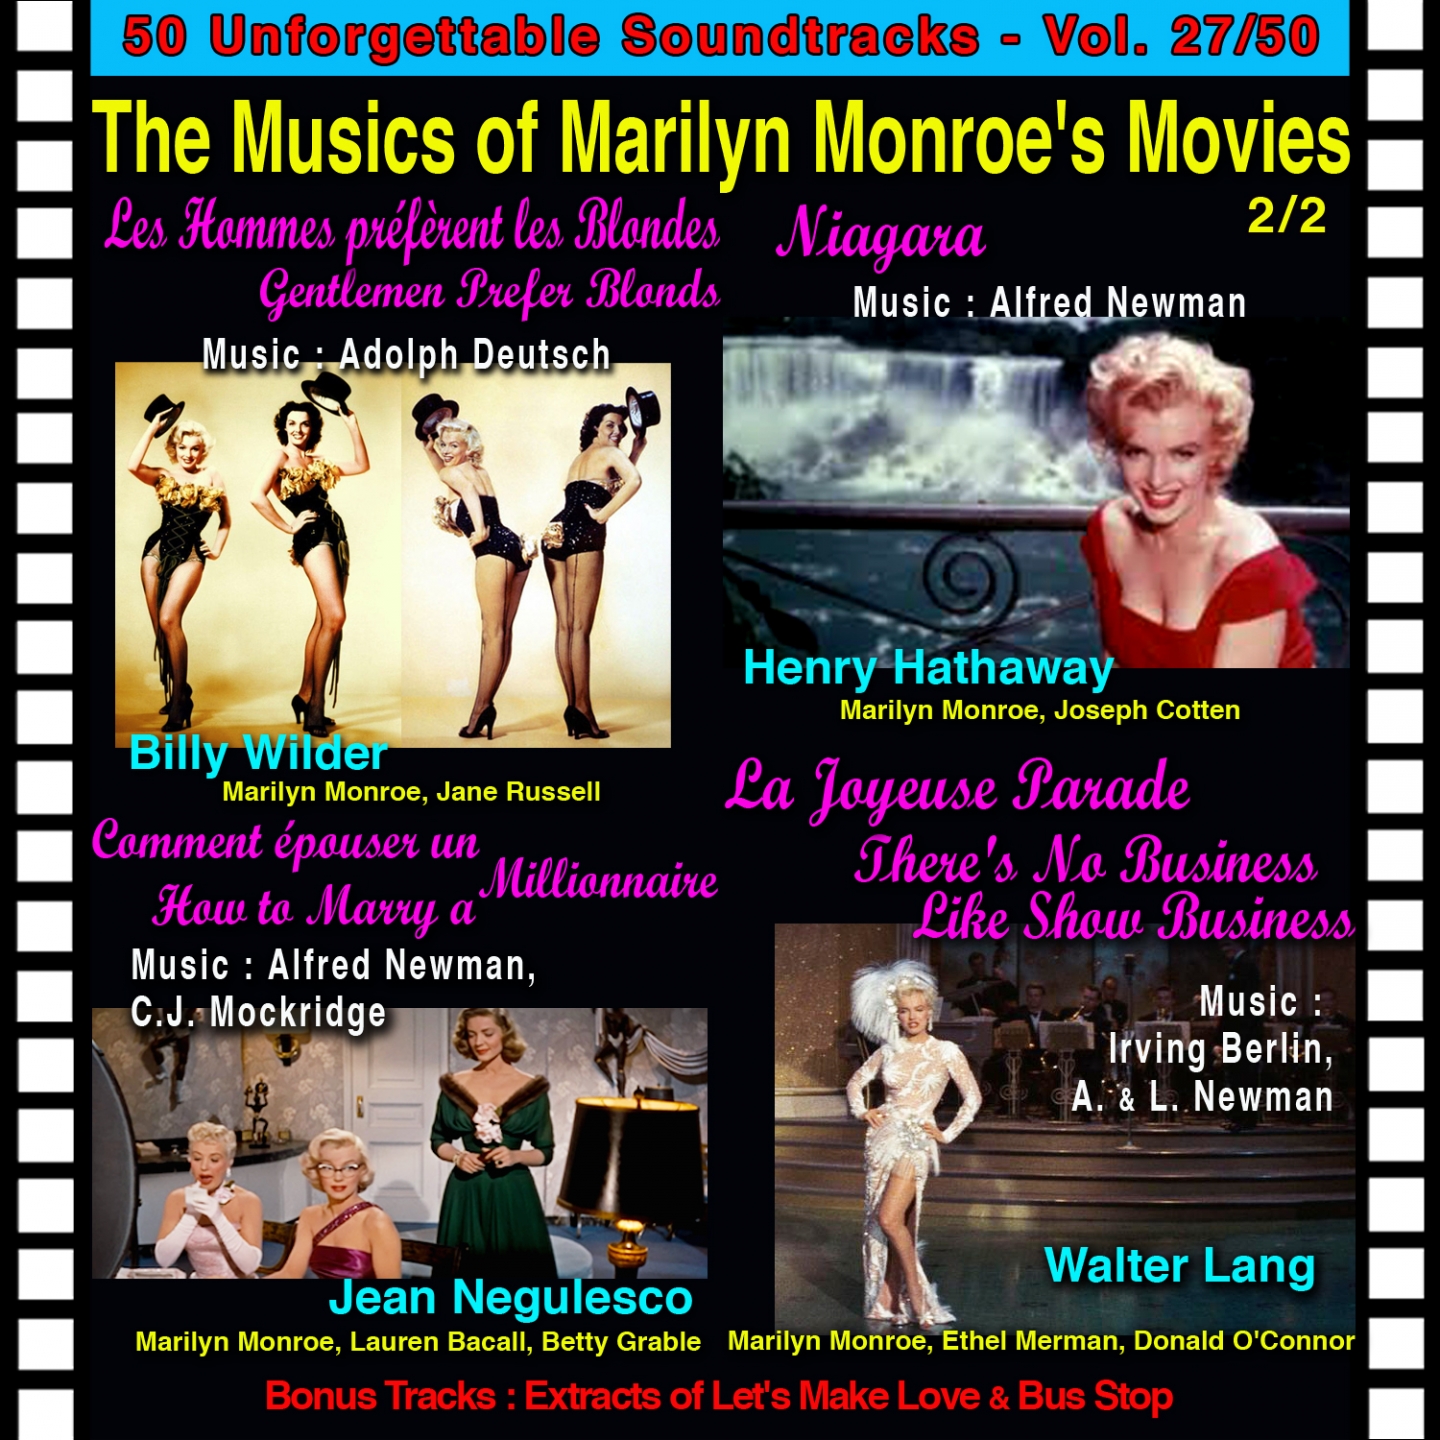 Le Milliardaire / Let's Make Love: My Heart Belongs to Daddy (Marilyn Music Movies (2 / 2))